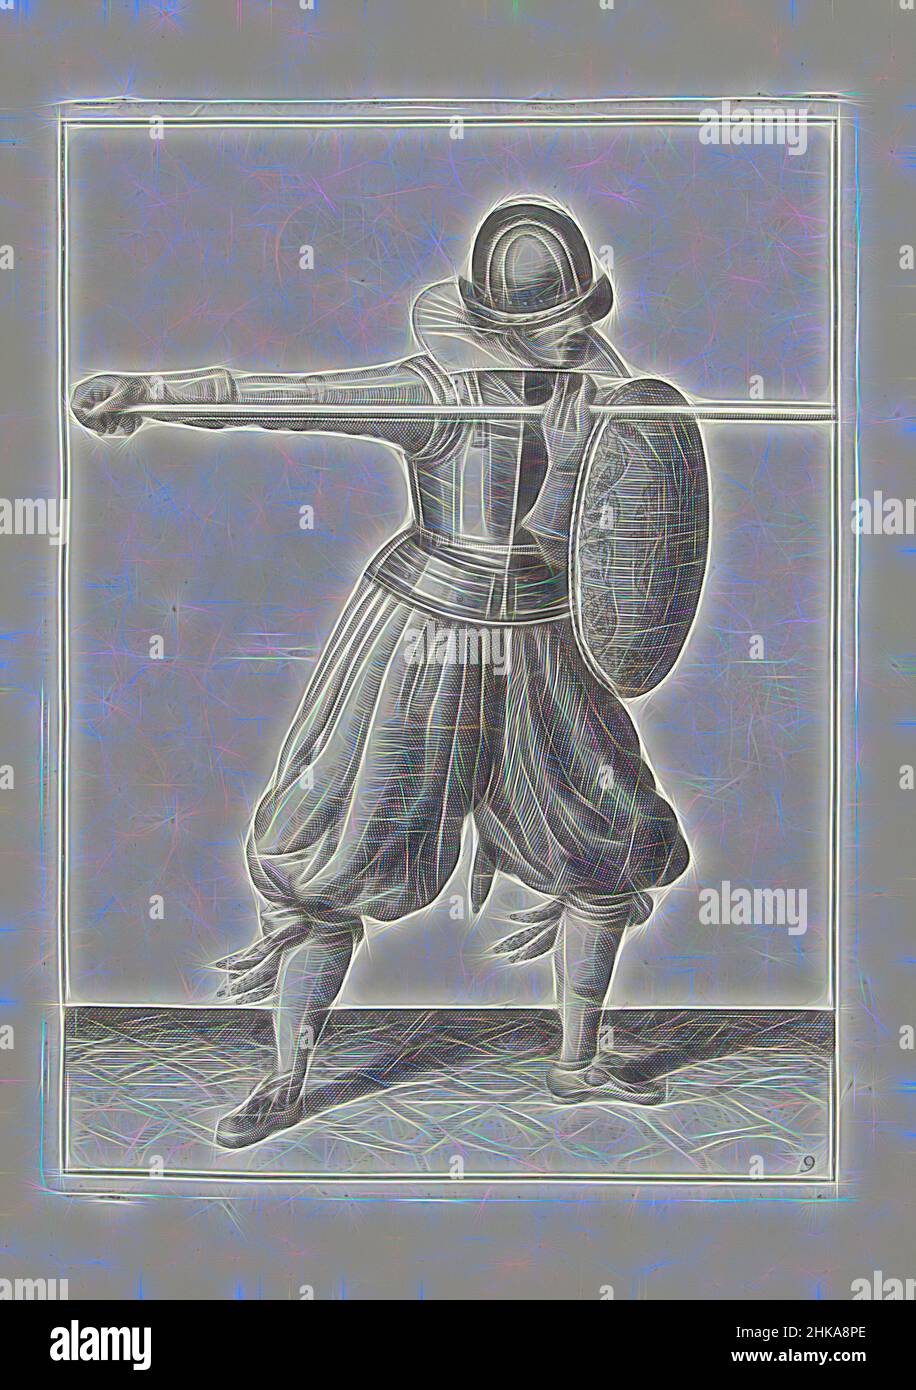 Inspired by The exercise with shield and spear: the soldier brings the spear into position in three times, third movement with the spear straight ahead (nr. 9), 1618, De Nassausche Wapen-Handelinge, van Schilt, Spies, Rappier ende Targe : beyde figuerlick afgebeelt, ende gestelt na de nieuwe ordening, Reimagined by Artotop. Classic art reinvented with a modern twist. Design of warm cheerful glowing of brightness and light ray radiance. Photography inspired by surrealism and futurism, embracing dynamic energy of modern technology, movement, speed and revolutionize culture Stock Photo